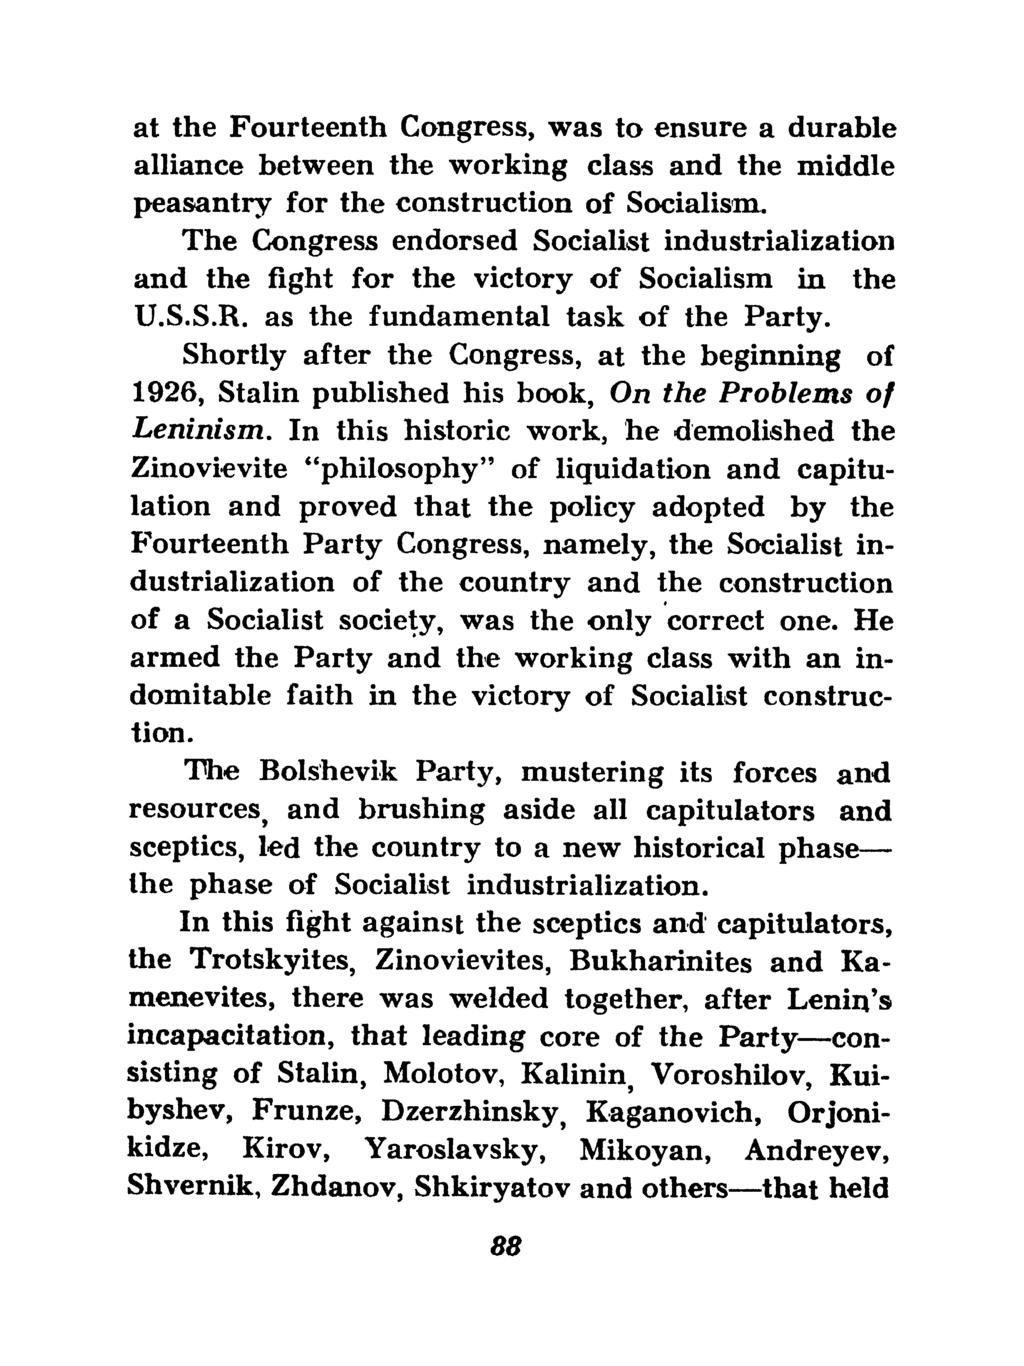 at the Fourteenth Congress, was to ensure a durable alliance between the working class and the middle peasantry for the construction of Socialism.